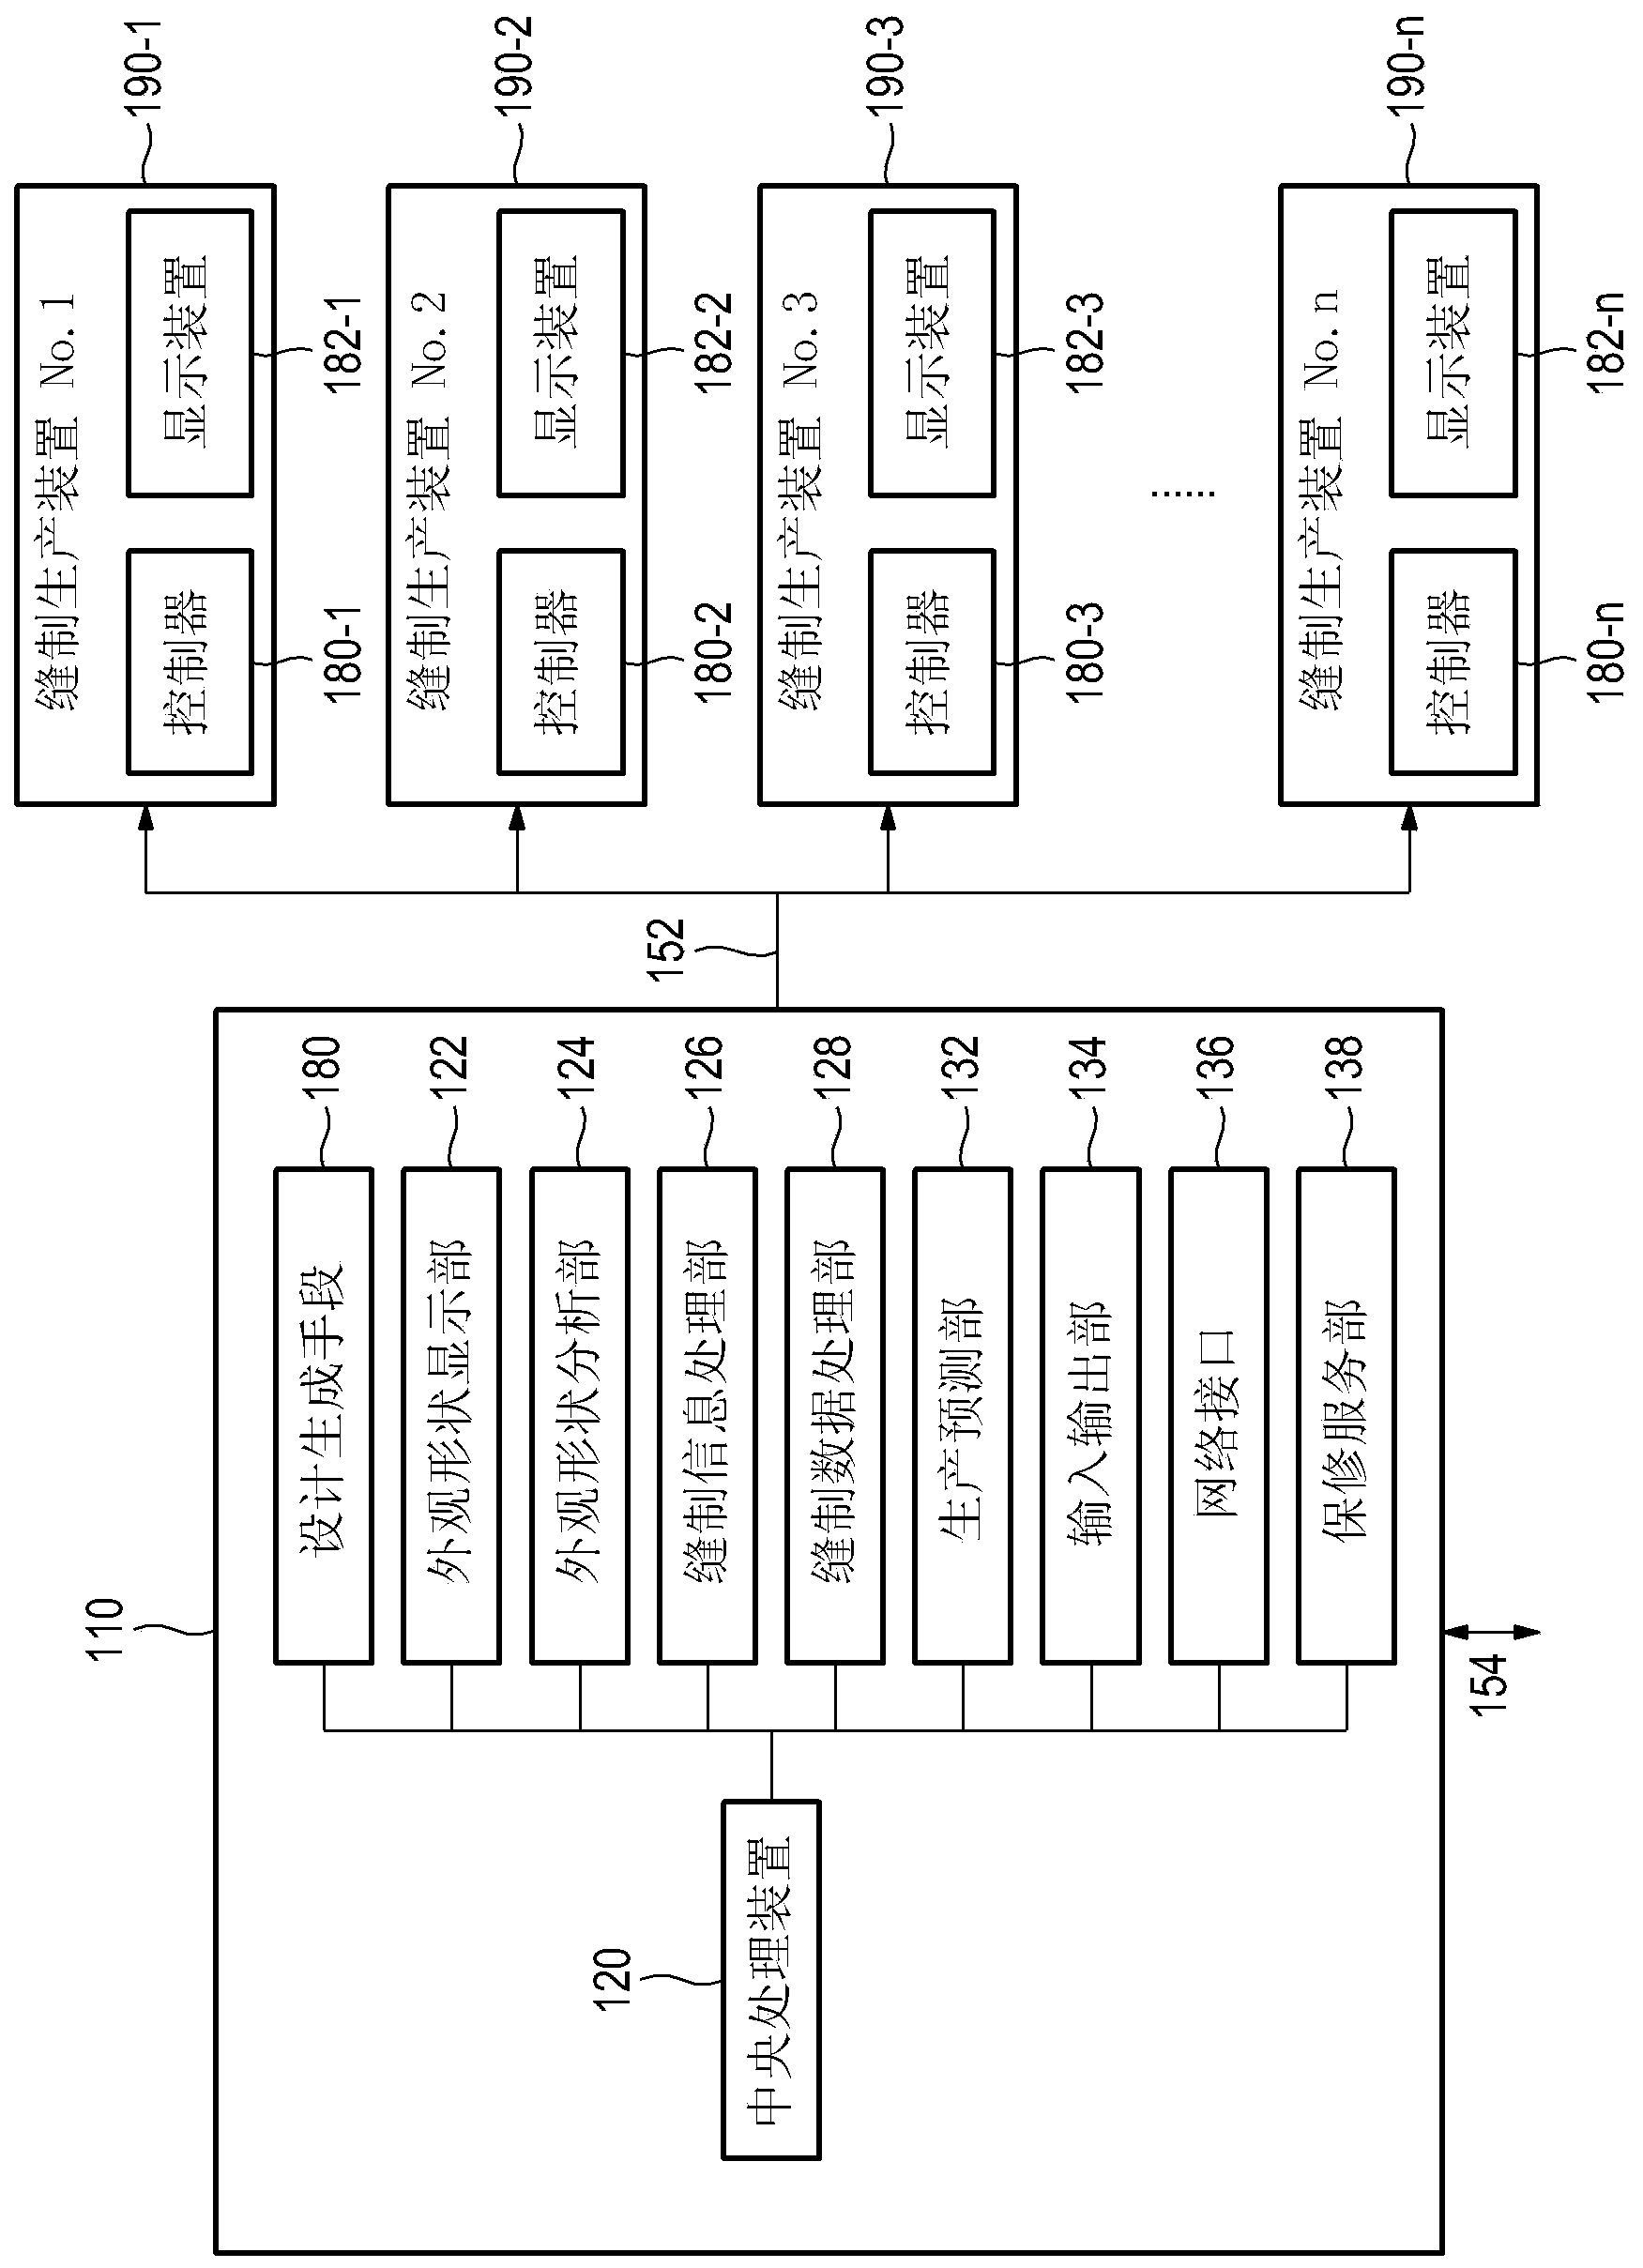 Sewing design manufacturing management apparatus and method